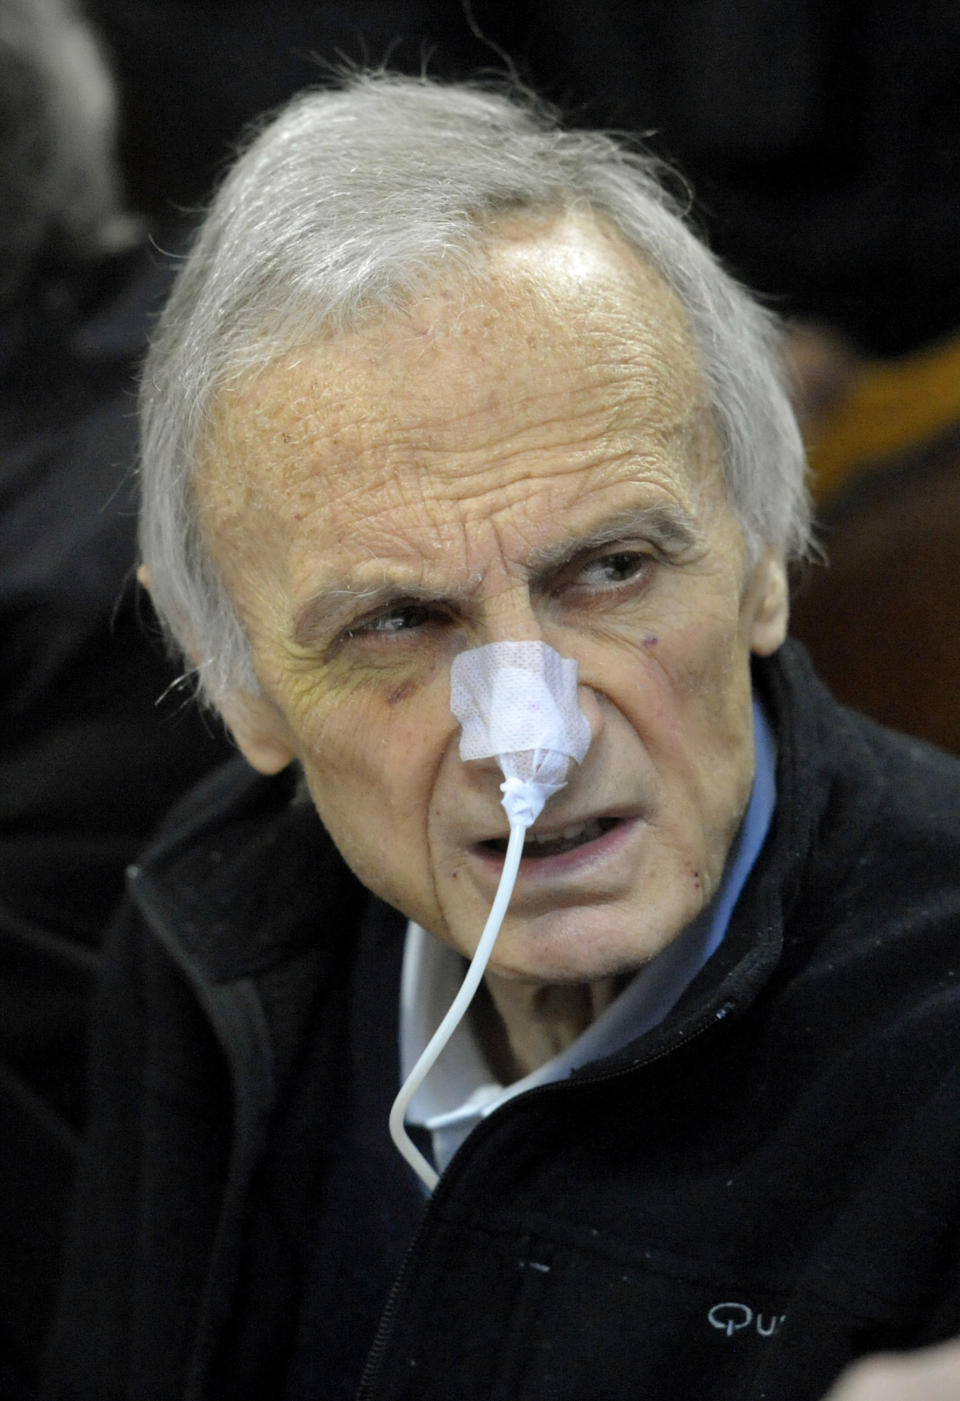 Italian dairy giant Parmalat founder Calisto Tanzi, with a medical tube attached to his nose, attends an appeal trial hearing, in Bologna, Italy, Monday, March 26, 2012. Tanzi in 2010 was convicted of fraudulent bankruptcy and criminal association in Europe's largest corporate failure, the euro14 billion failure (US$18 billion) of his dairy empire in 2003. He was sentenced to 8 years and one month in prison. Tanzi has been in ill health for months. (AP Photo/Marco Vasini)